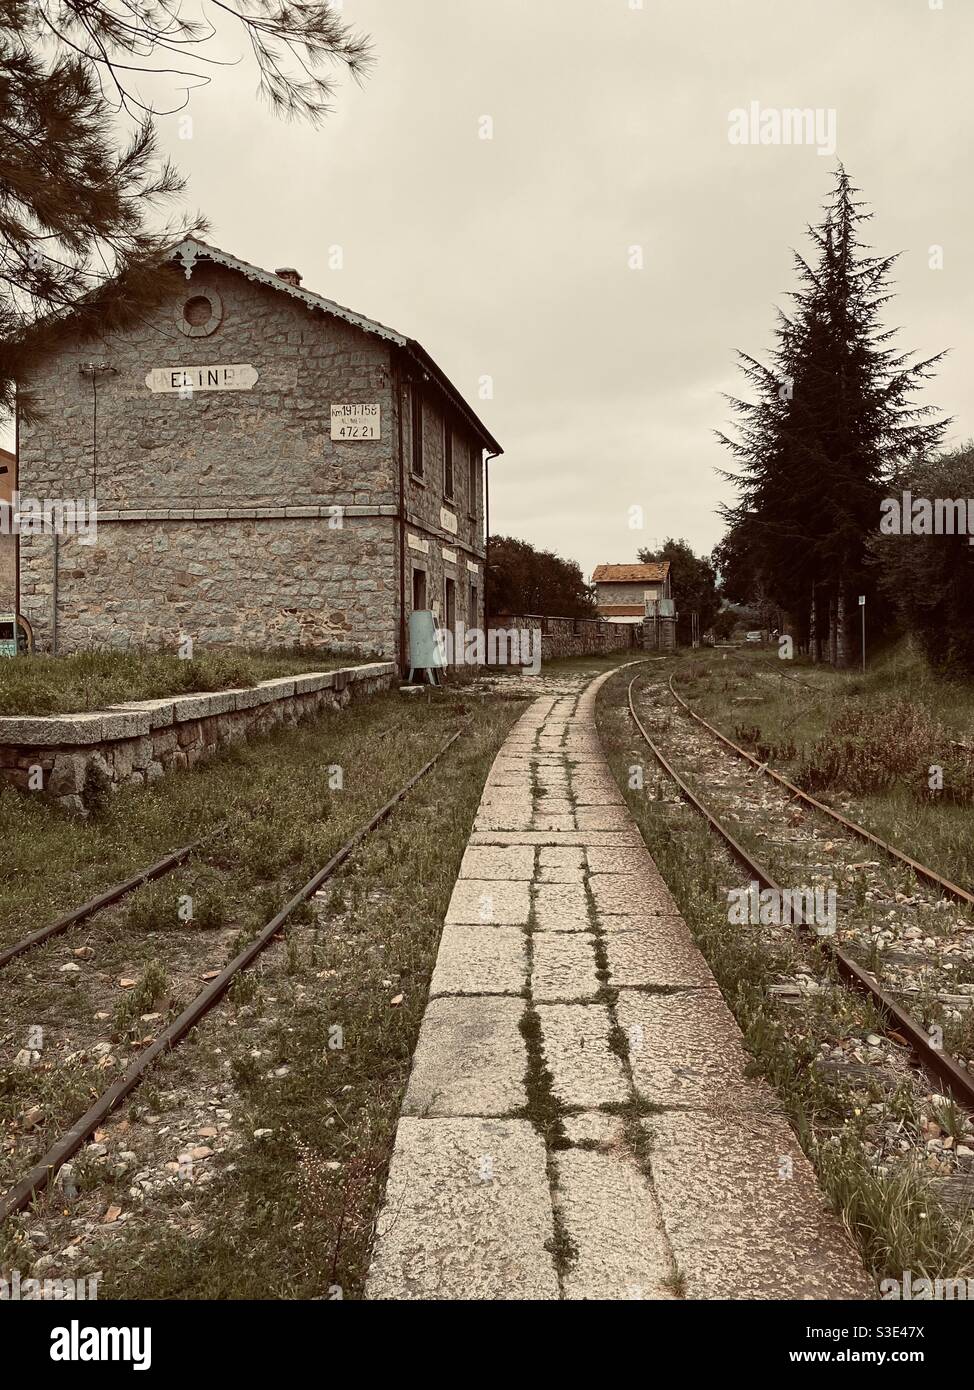 Railroad and building of an old and dismissed train station in a rural town. Stock Photo